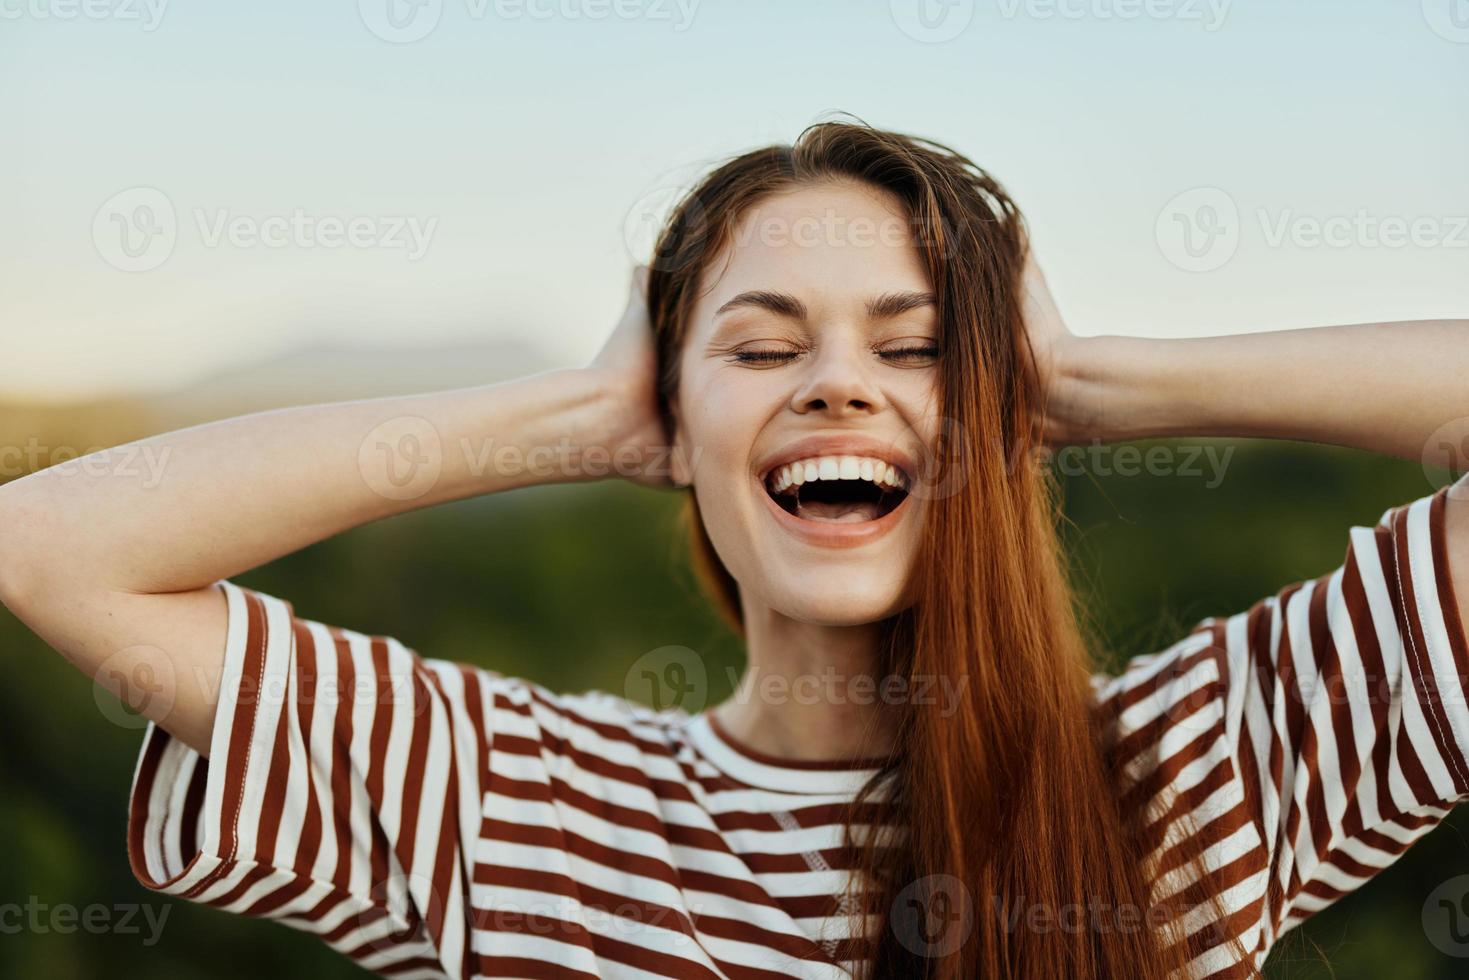 A young woman in a striped T-shirt sincerely laughs with her mouth open while traveling against the backdrop of autumn nature photo